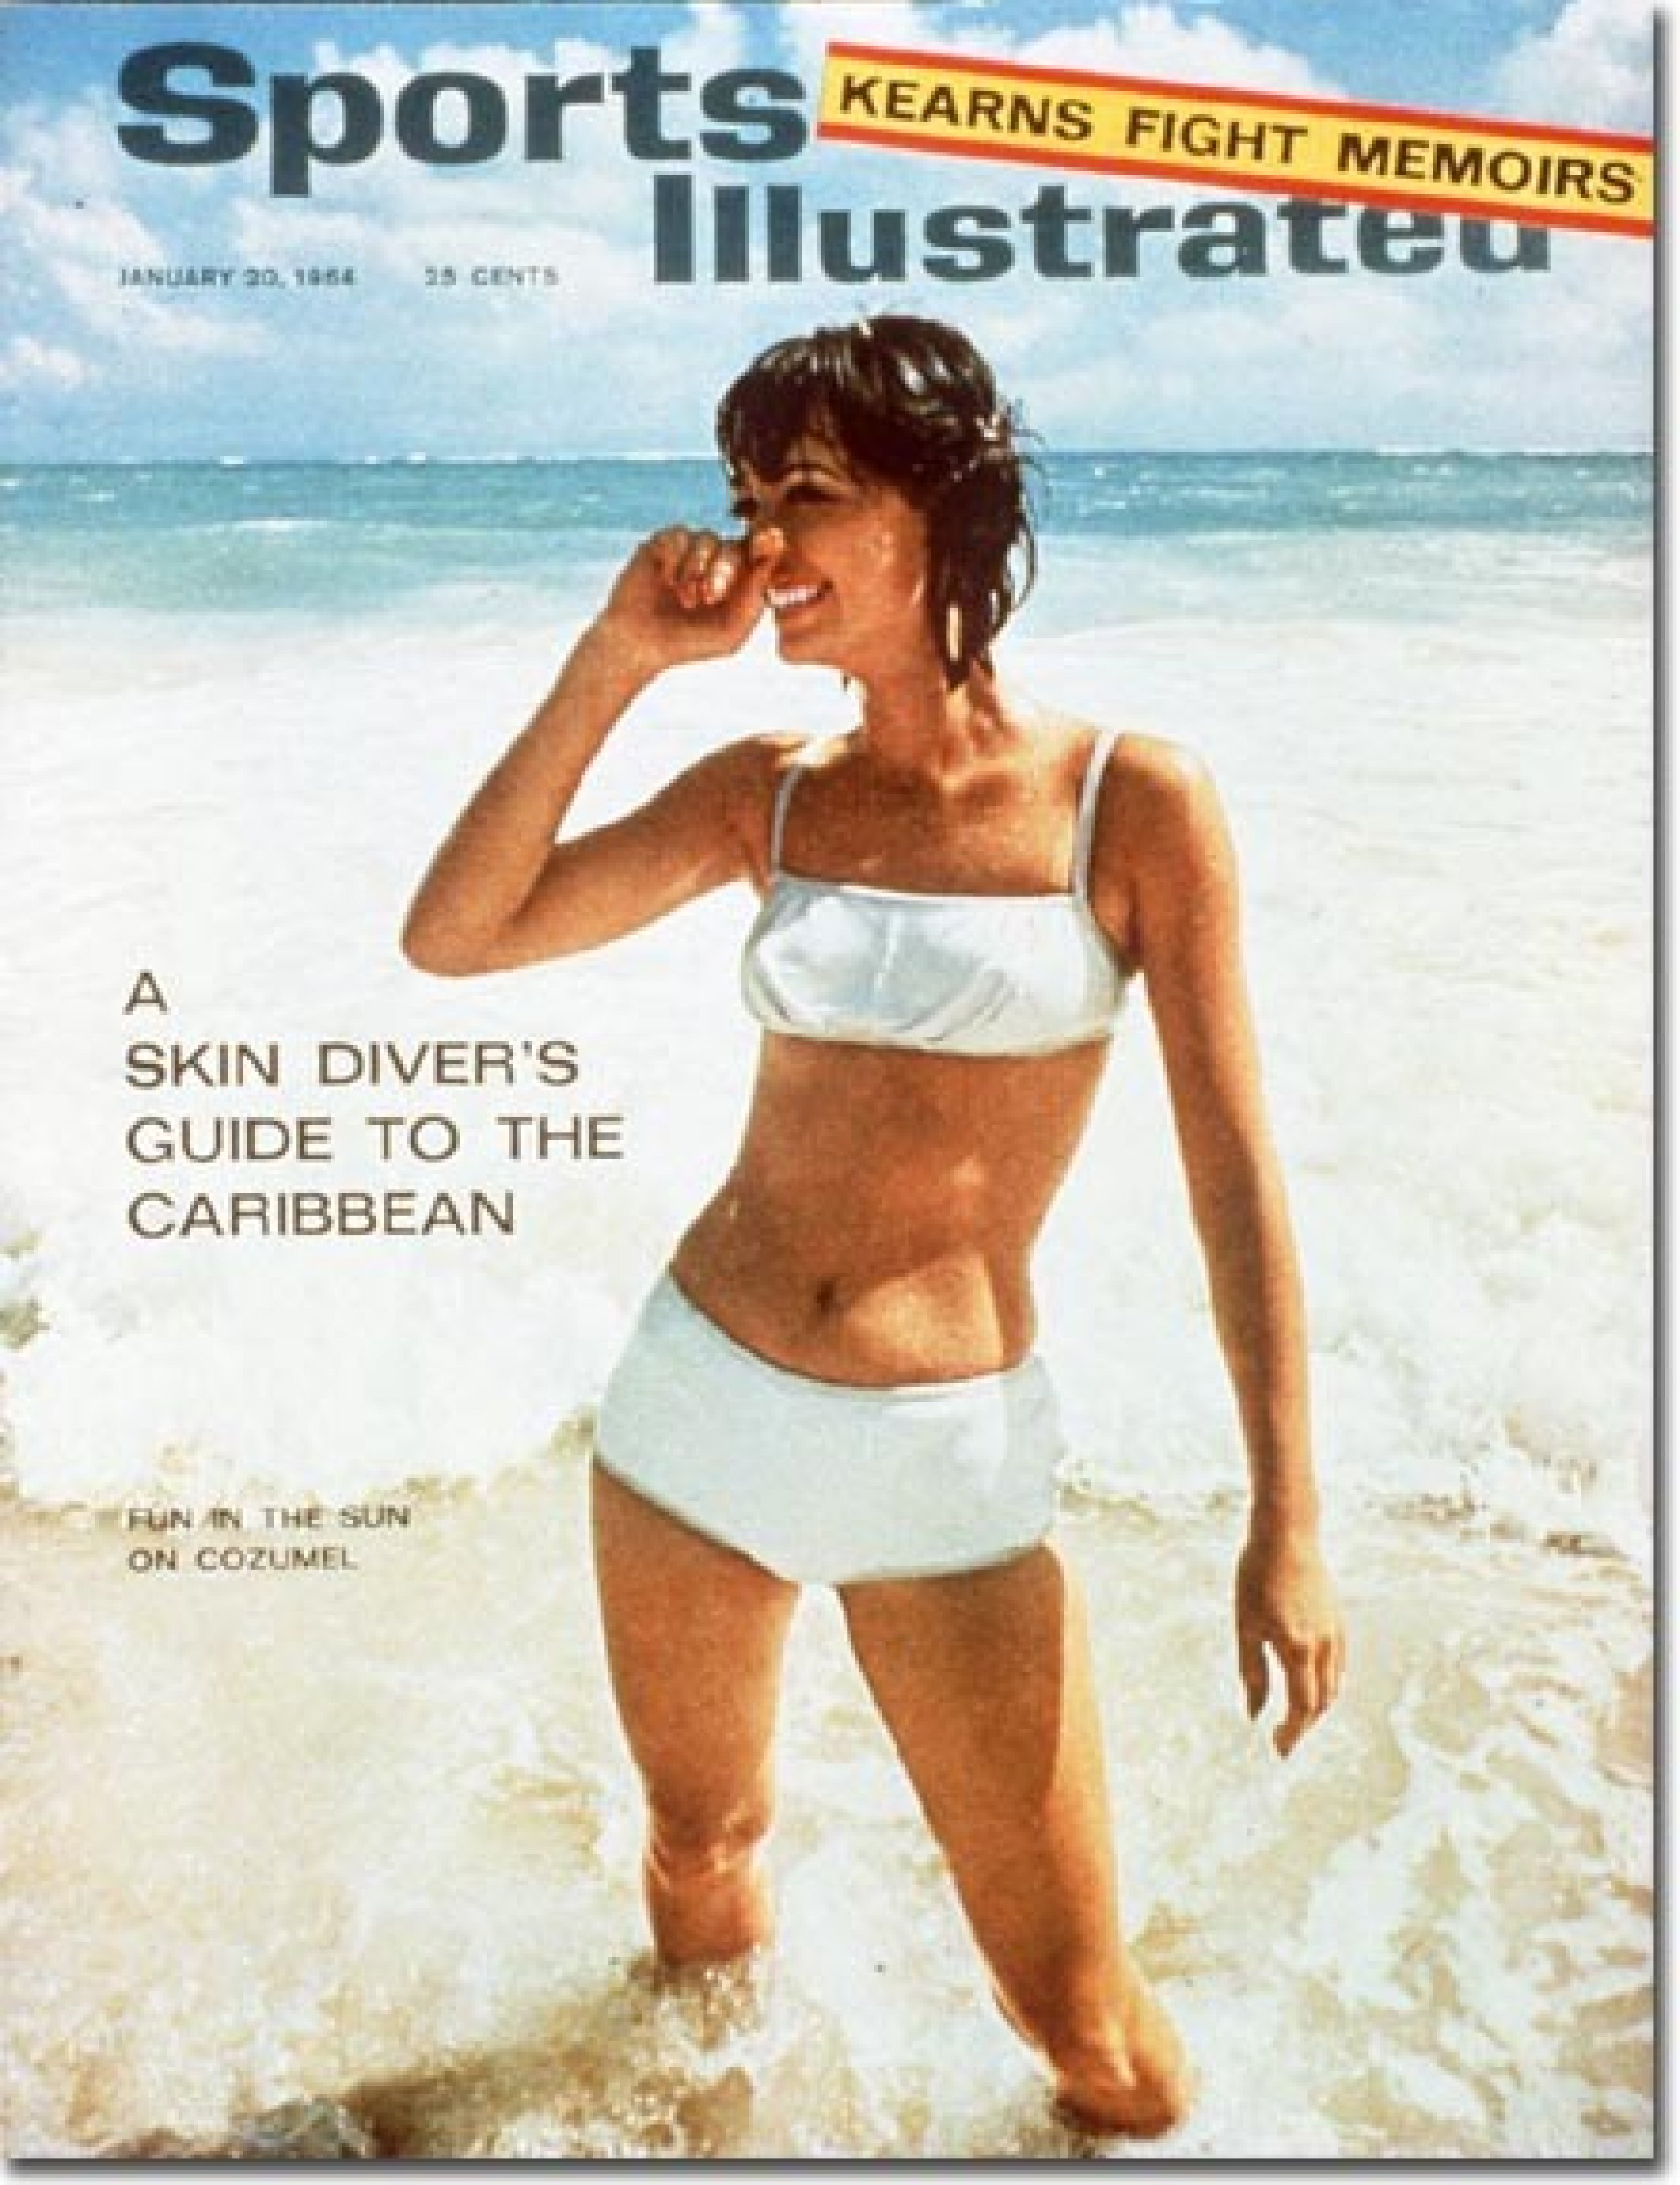 The Original 1964 Sports Illustrated Swimsuit Edition Cover